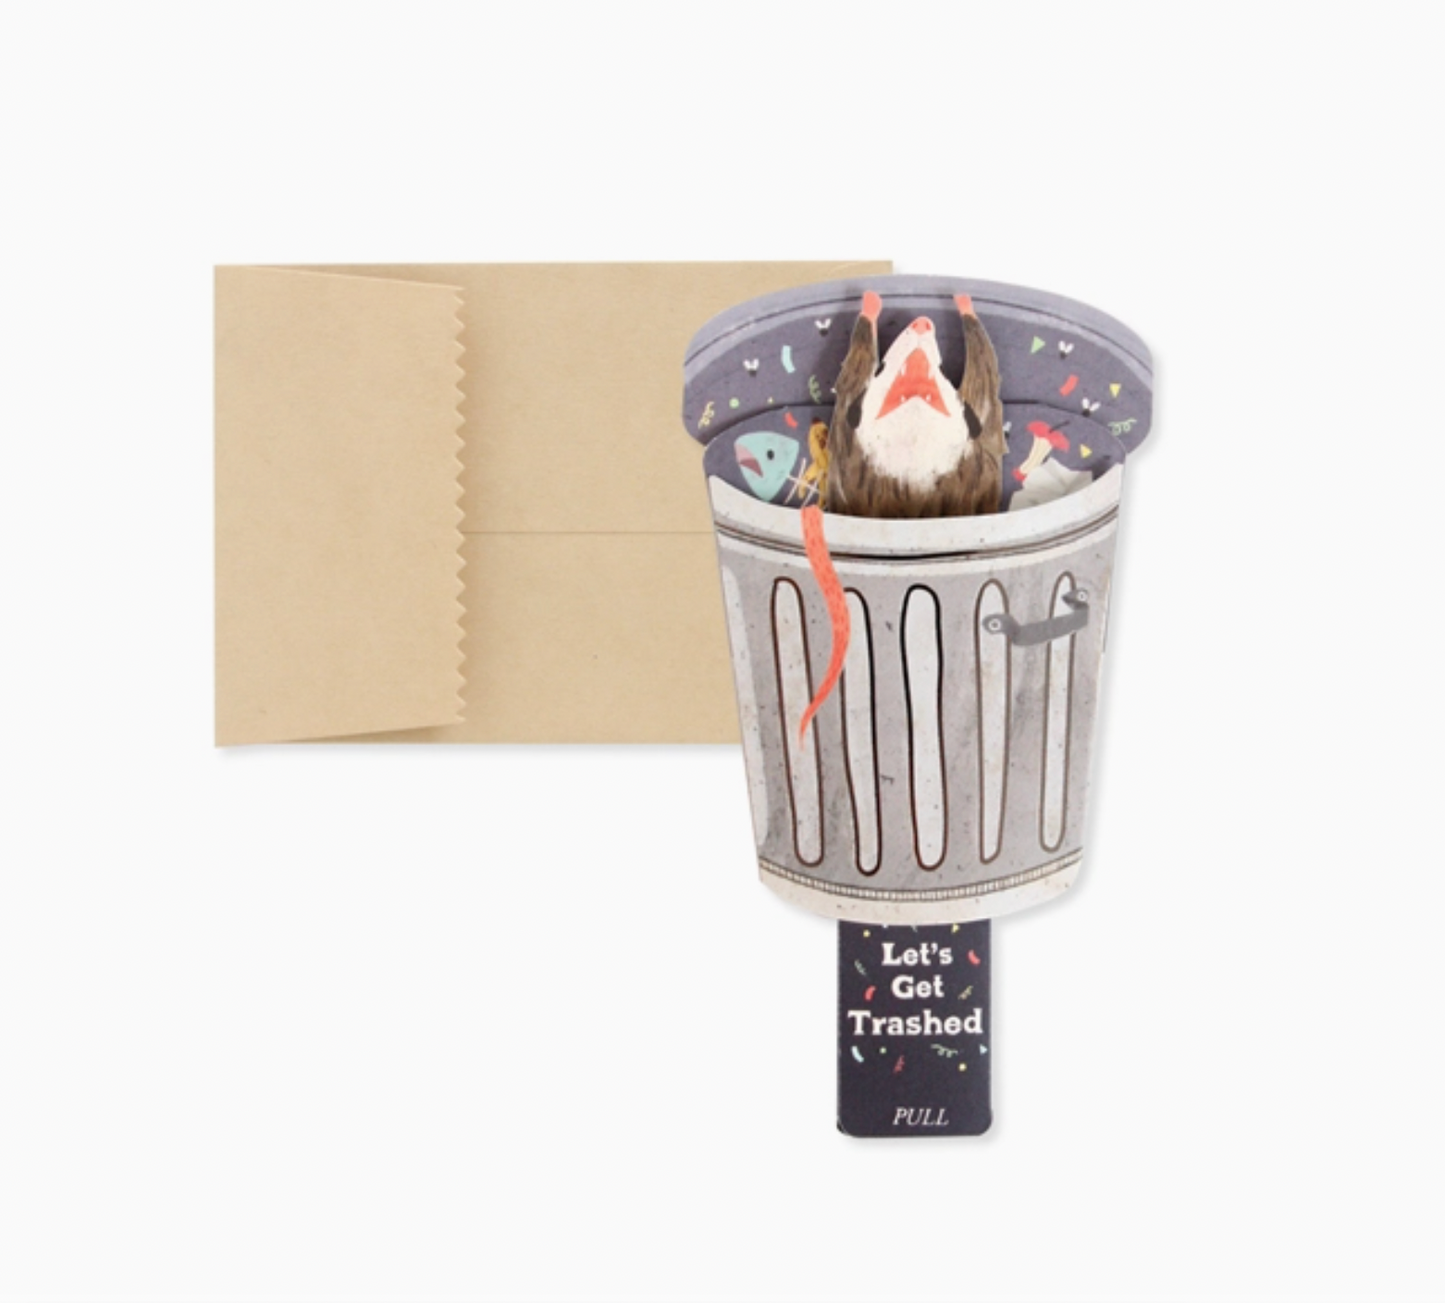 Possum Lets Get Trashed Interactive Greeting Card